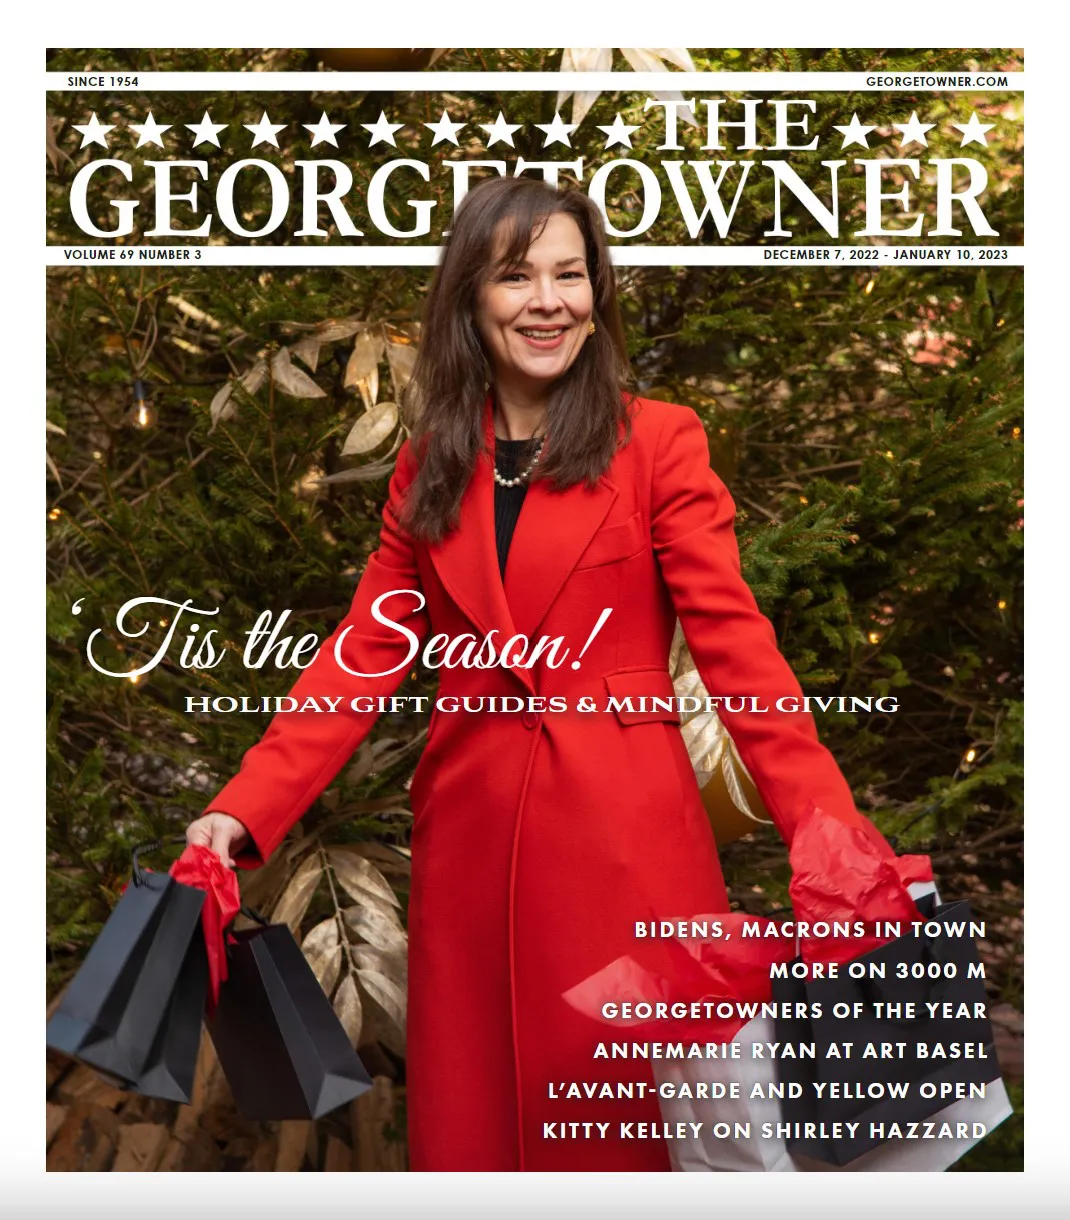 Woman with long brown hair, wearing a long red coat, and smiling holding Christmas gifts on a cover of a magazine